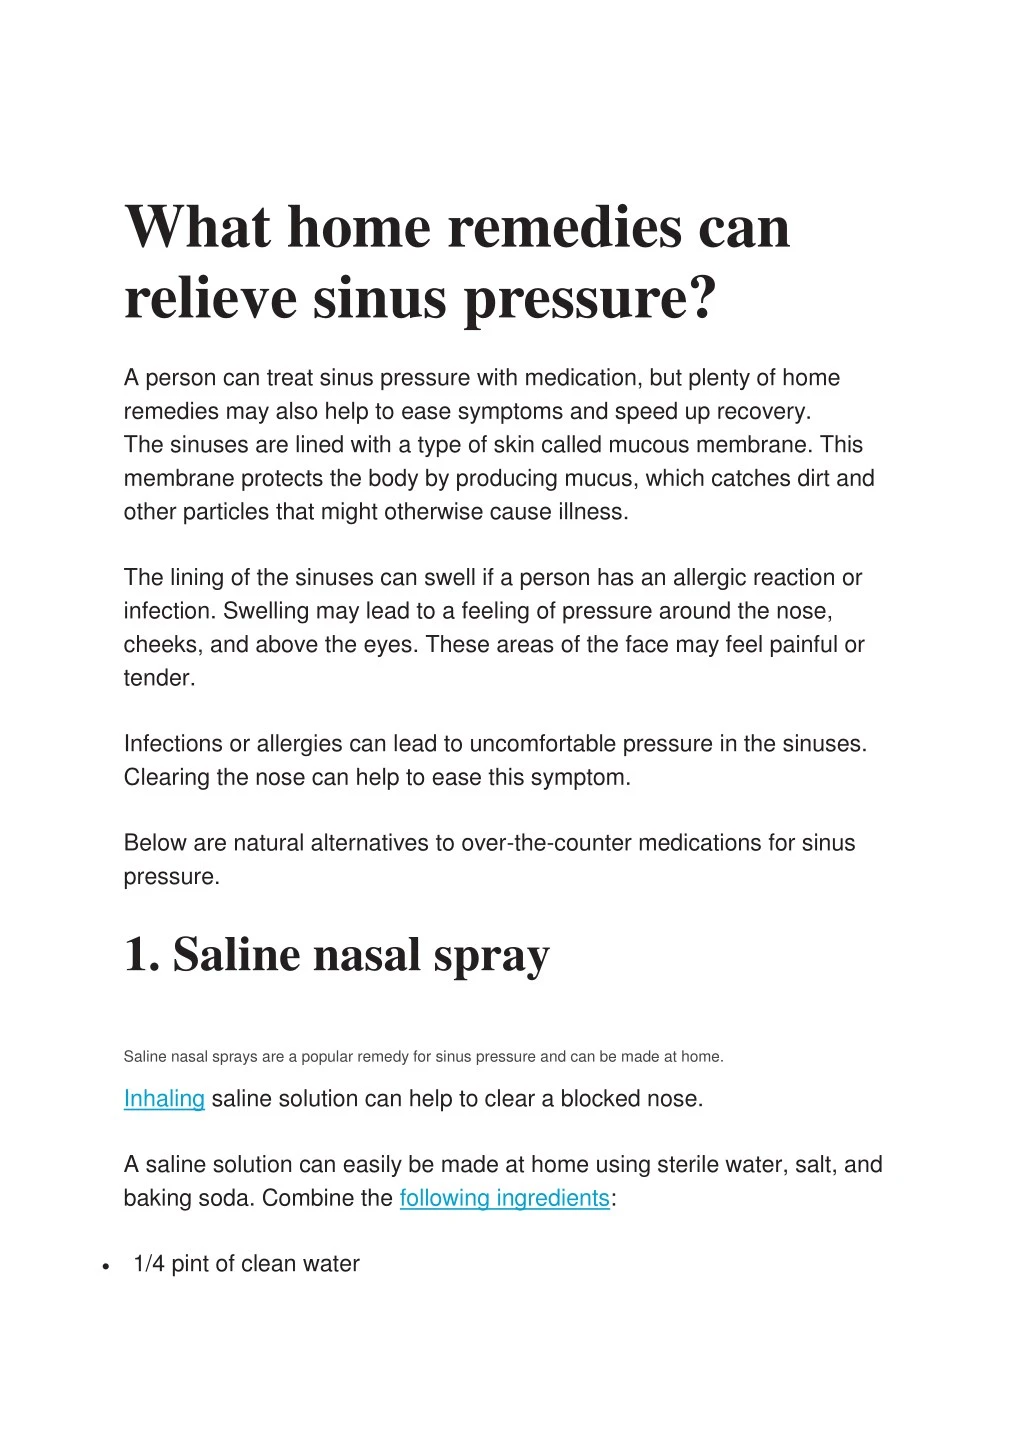 what home remedies can relieve sinus pressure